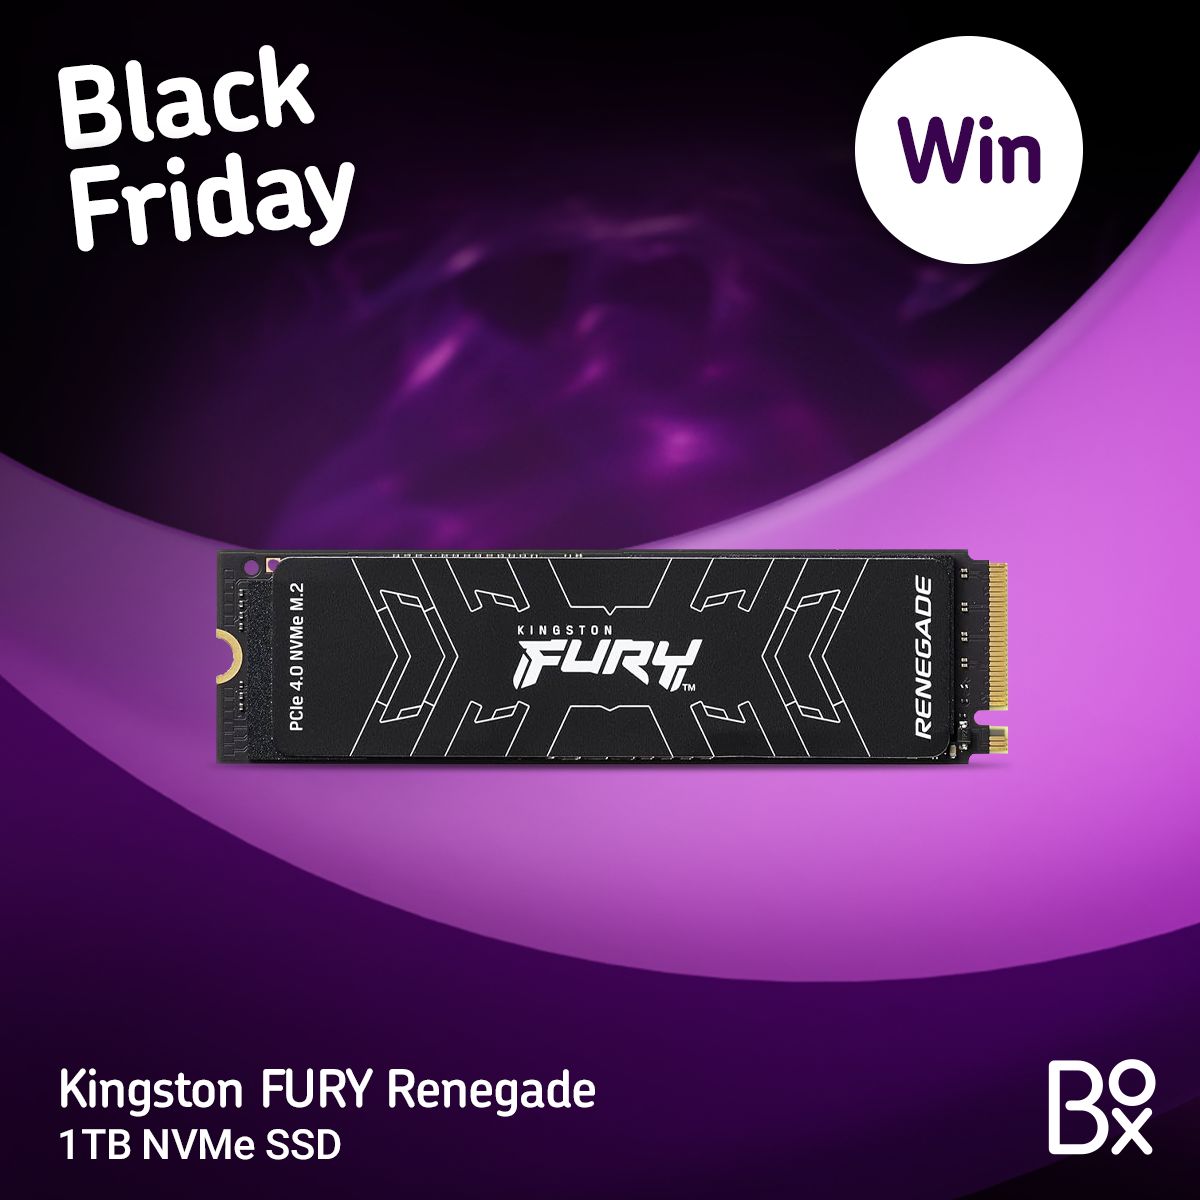 Black Friday giveaway time 🙌 This weekend only! Don't miss your chance to win a Kingston FURY Renegade SSD 👀 Here's how: 👉 Like & retweet this post⁠ 👉 Follow us & @kingstontech 🎮 Tell us what games you'll be storing on your new SSD ⁠ T&Cs apply. UK Only.